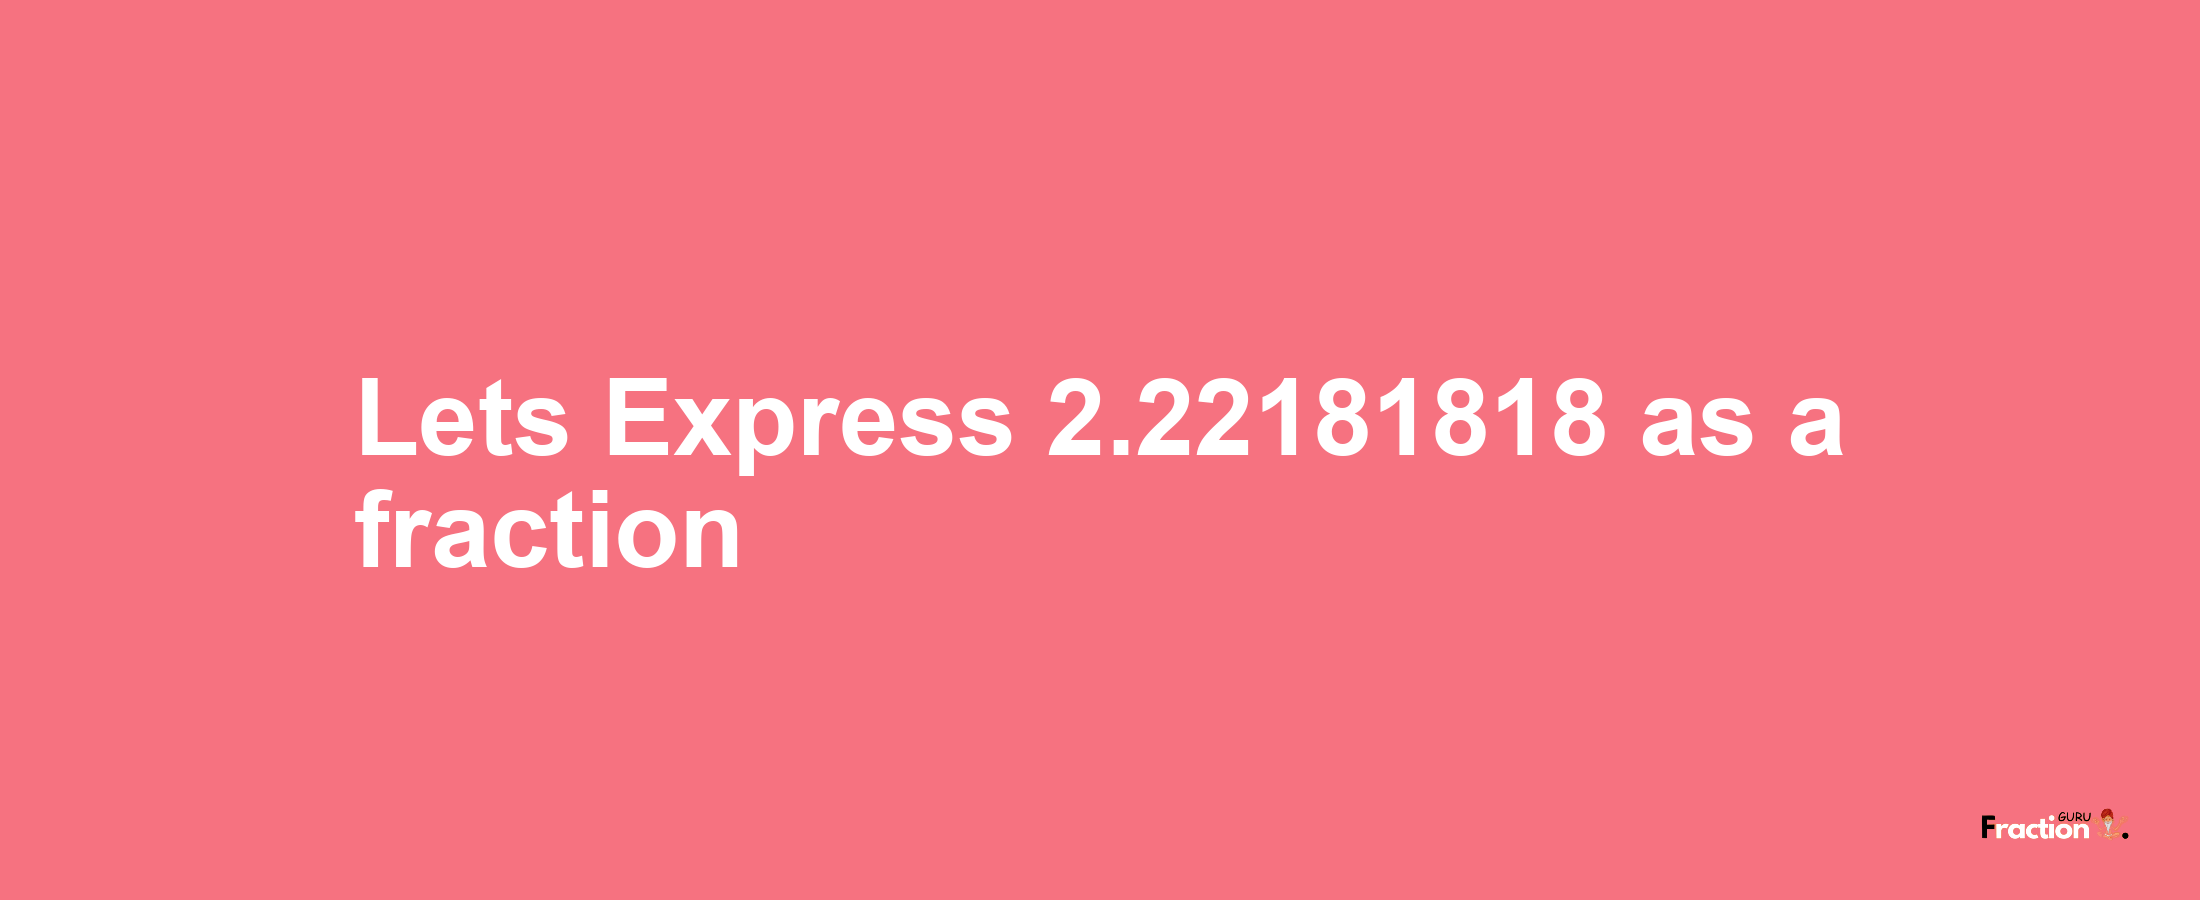 Lets Express 2.22181818 as afraction